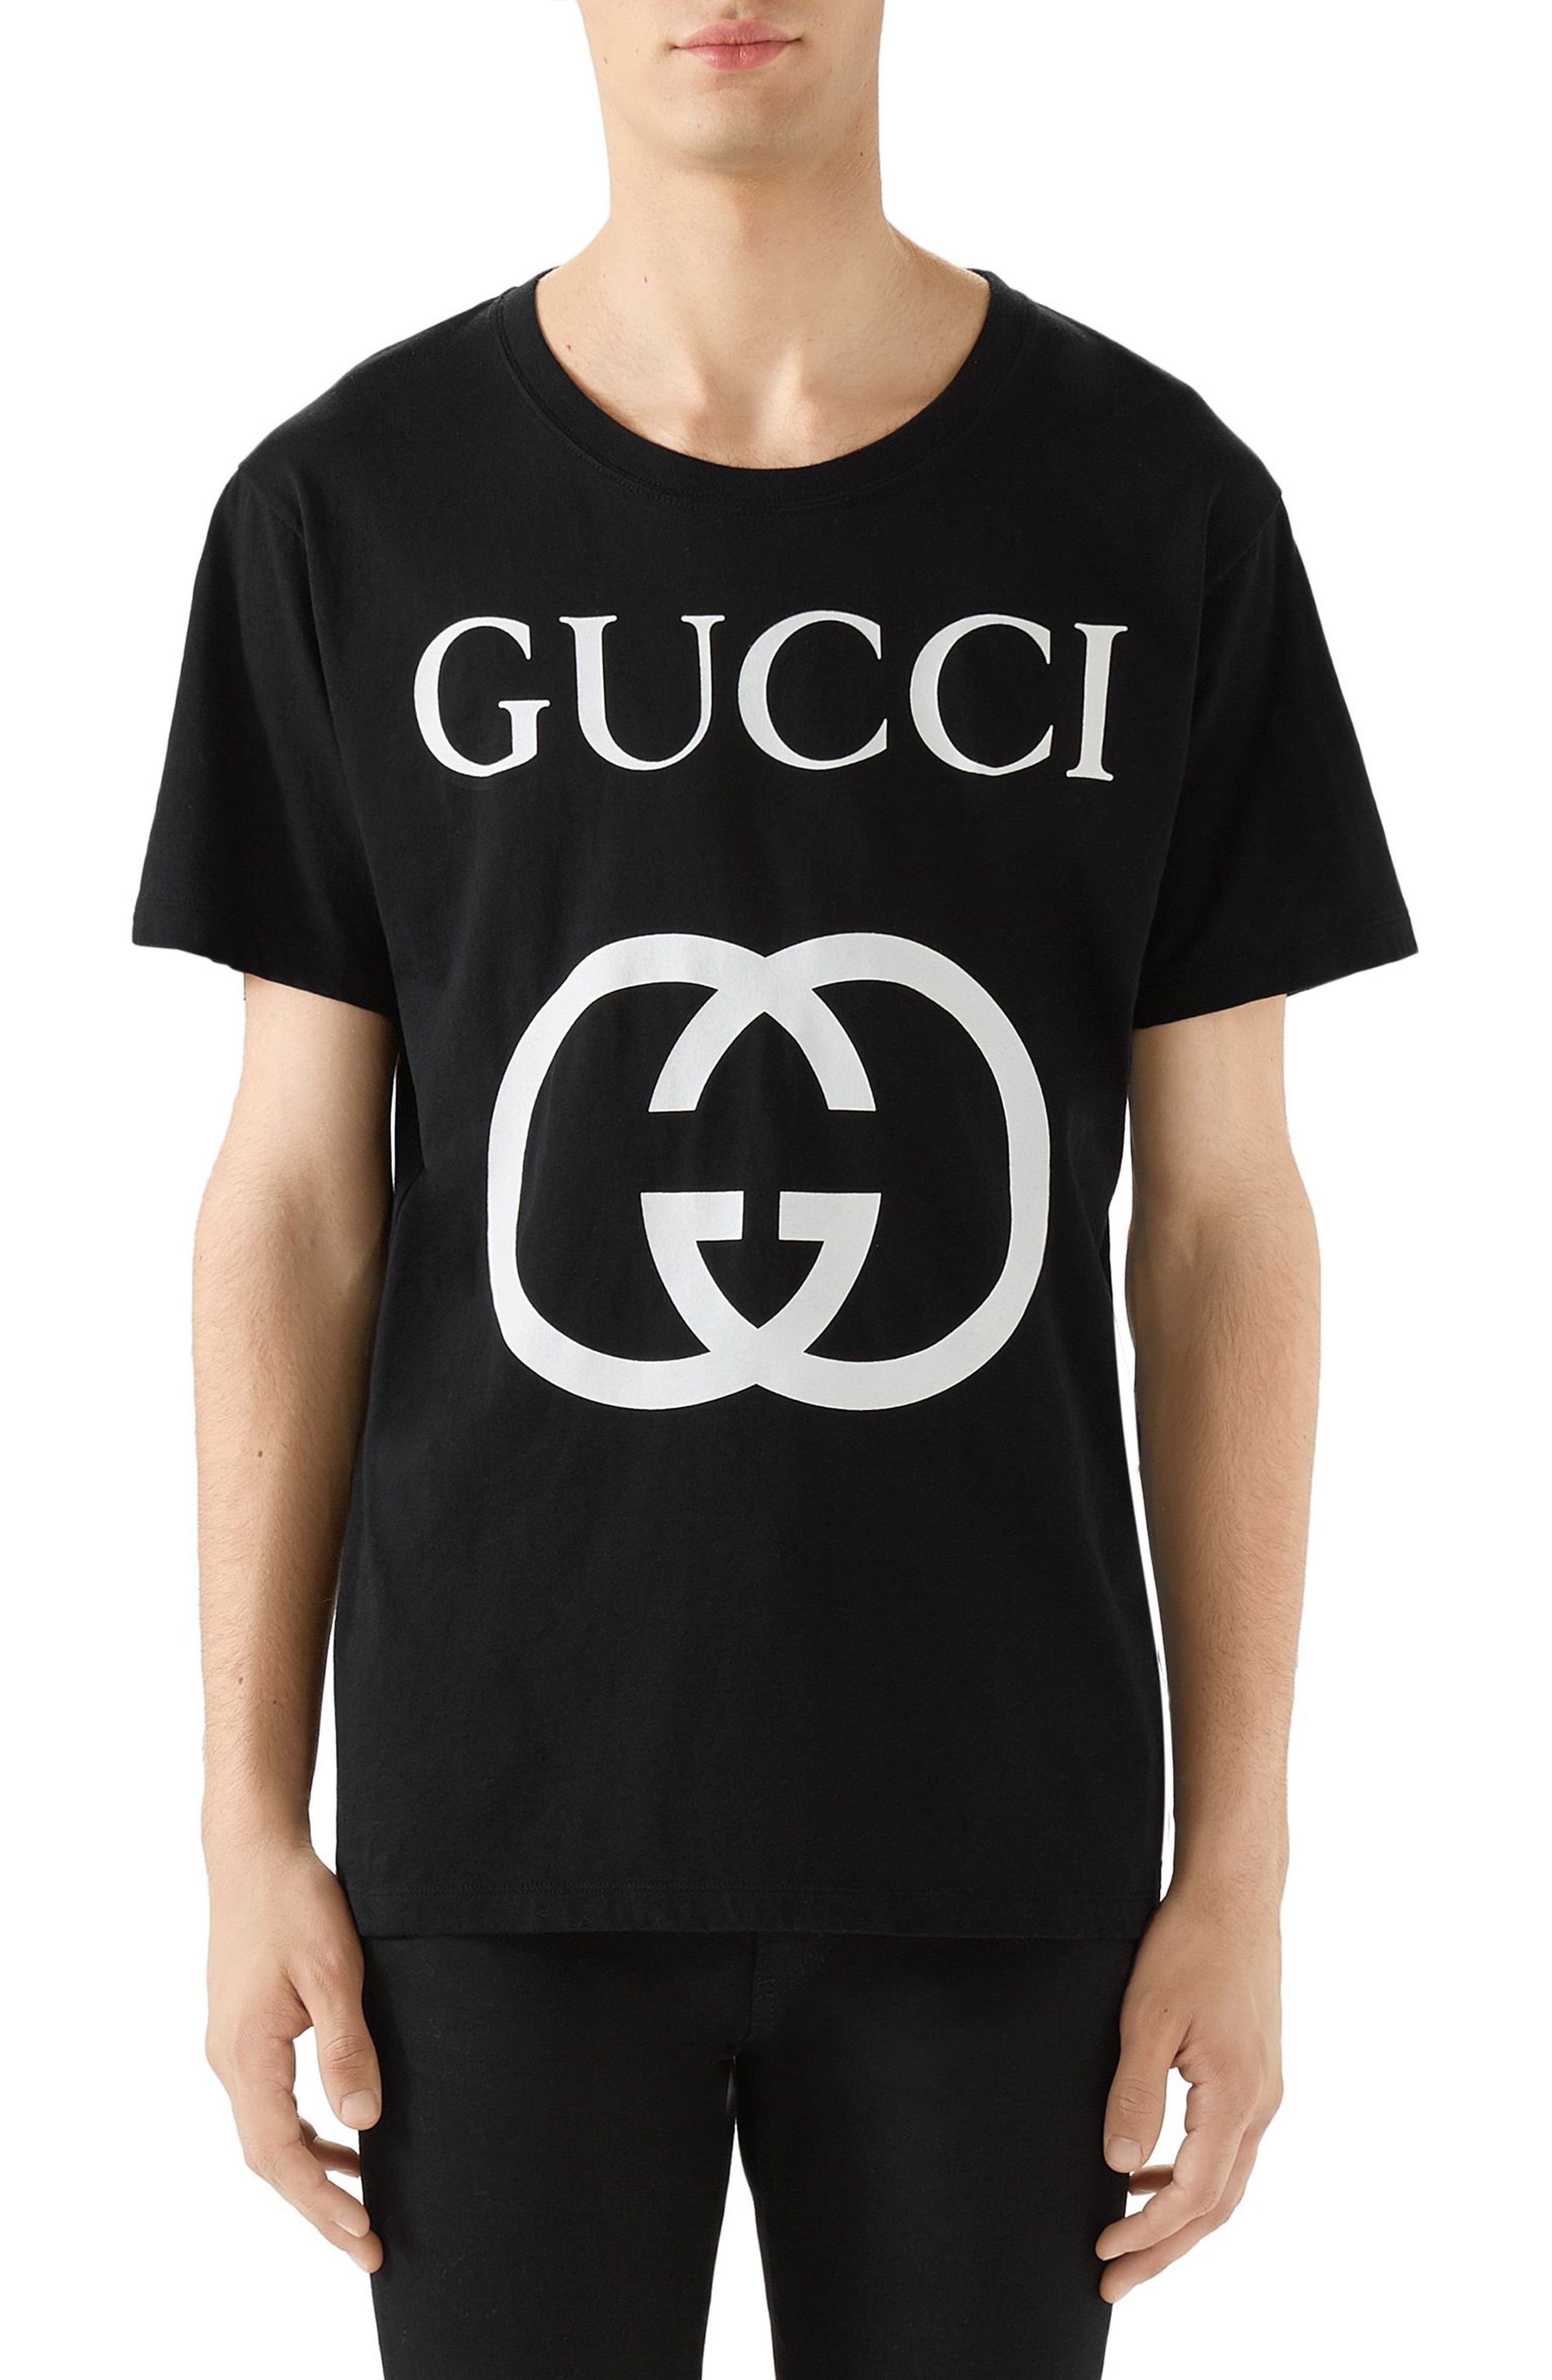 Gucci T Shirt : Gucci GG Logo Print T-shirt in Red for Men - Lyst / The ...